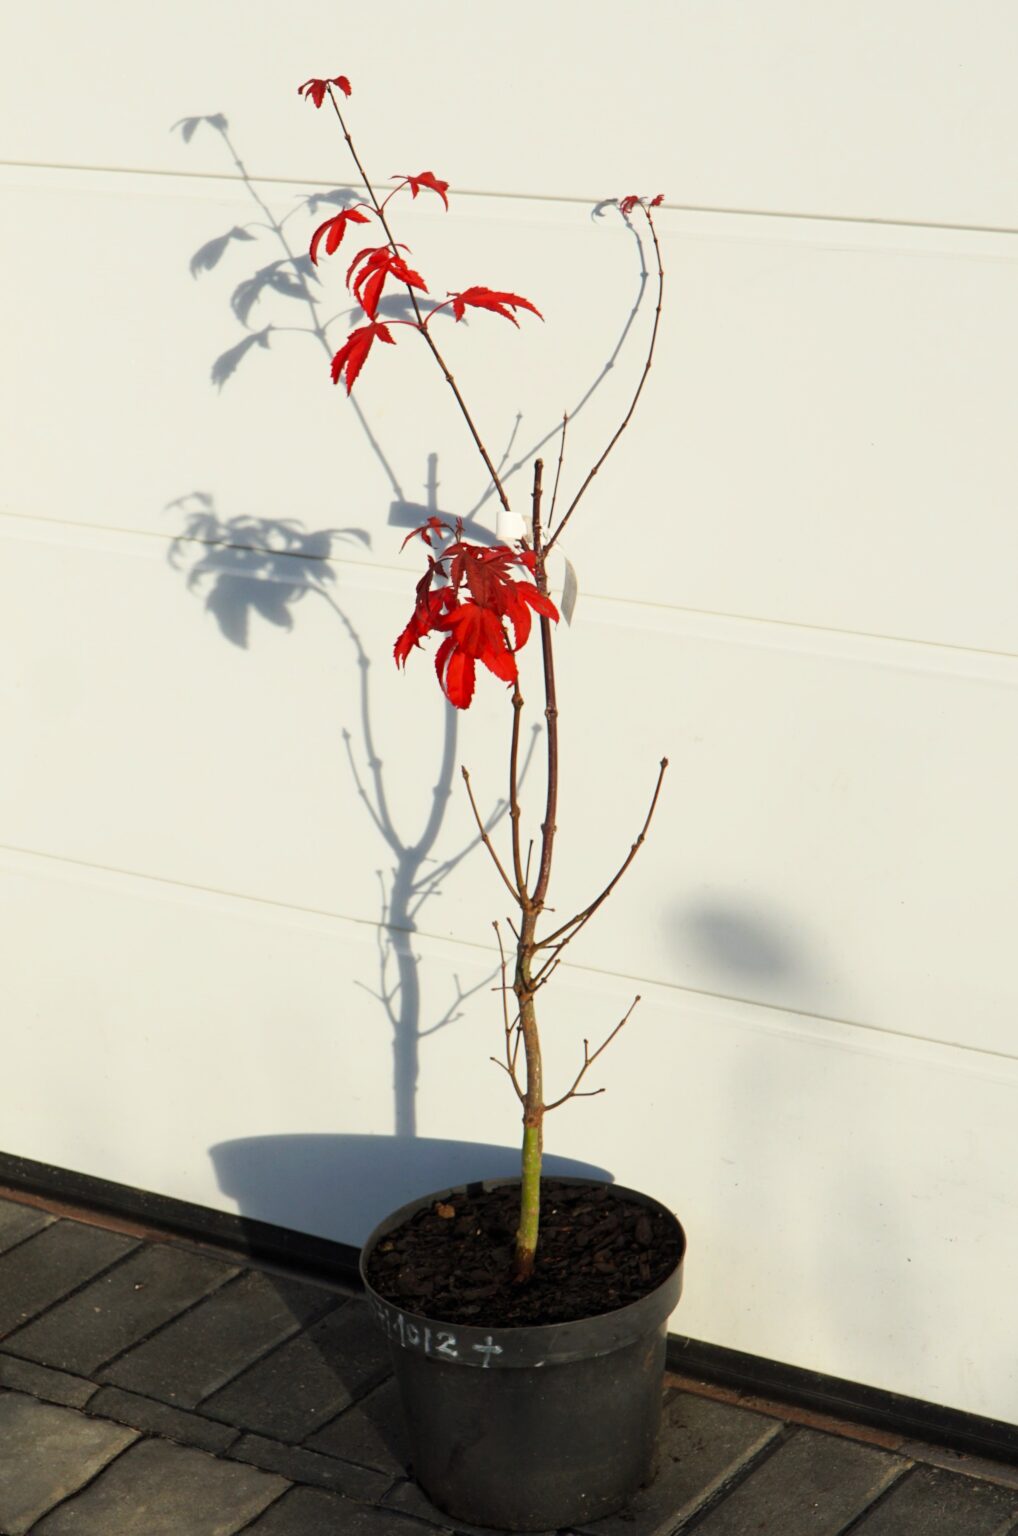 KLON PALMOWY RUSLYN IN THE PINK Acer palmatum